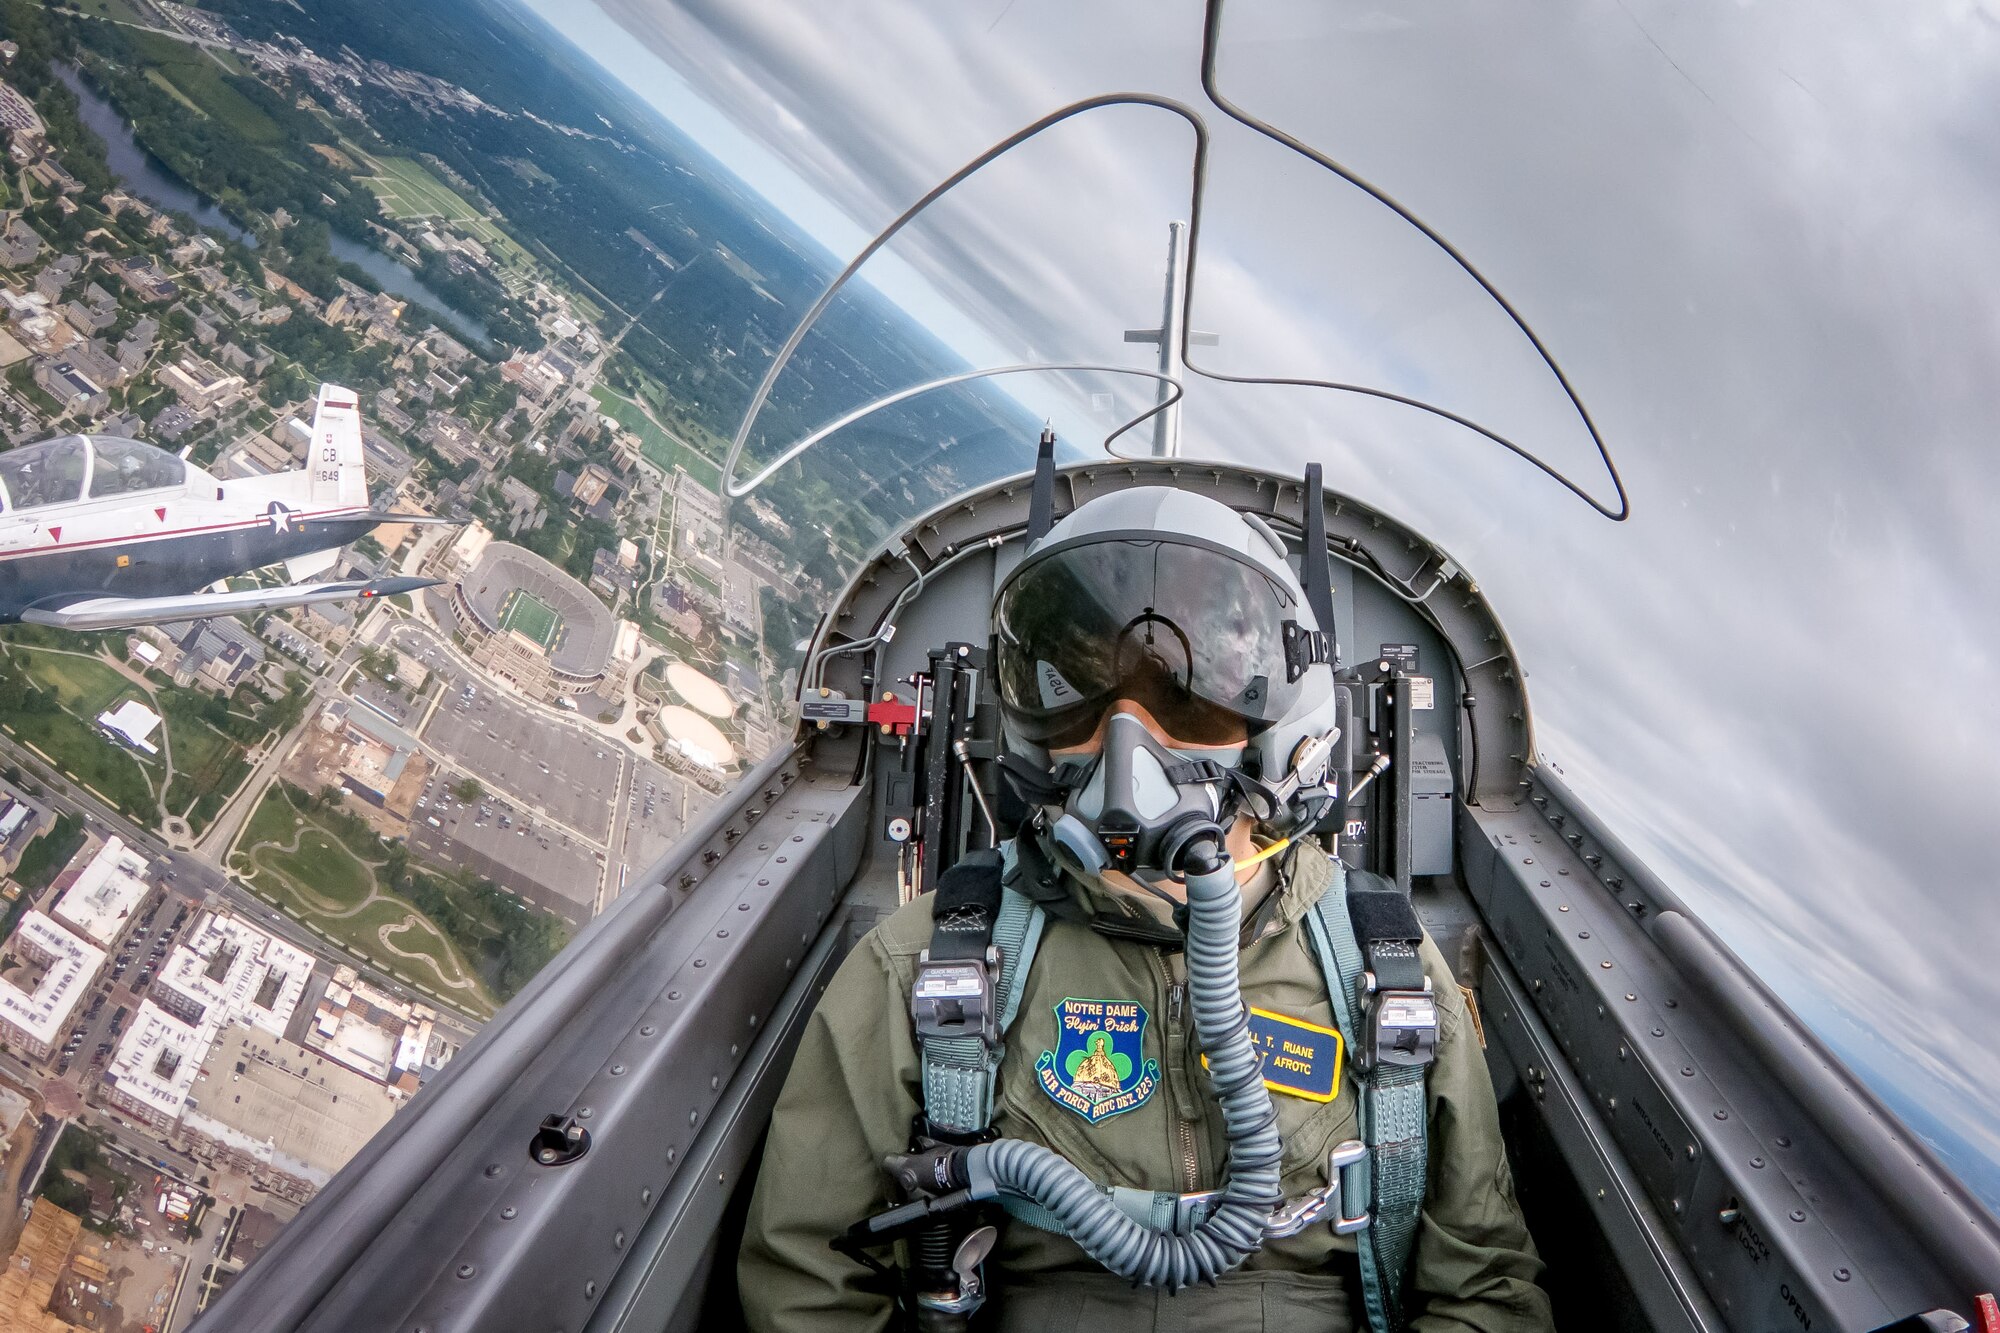 Notre Dame Air Force ROTC cadet Jill Ruane passes over campus as a backseater in a formation of two T-6 Texan IIs Sept. 9, 2018, in South Bend, Indiana. Several cadets from the Notre Dame Air Force ROTC program took familiarization flights in the T-6 the Sunday following the football game against Ball State. The aircraft belong to the 37th Flying Training Squadron who were on campus to perform the pregame flyover at the football game the previous day. (Photo by Matt Cashore/University of Notre Dame)